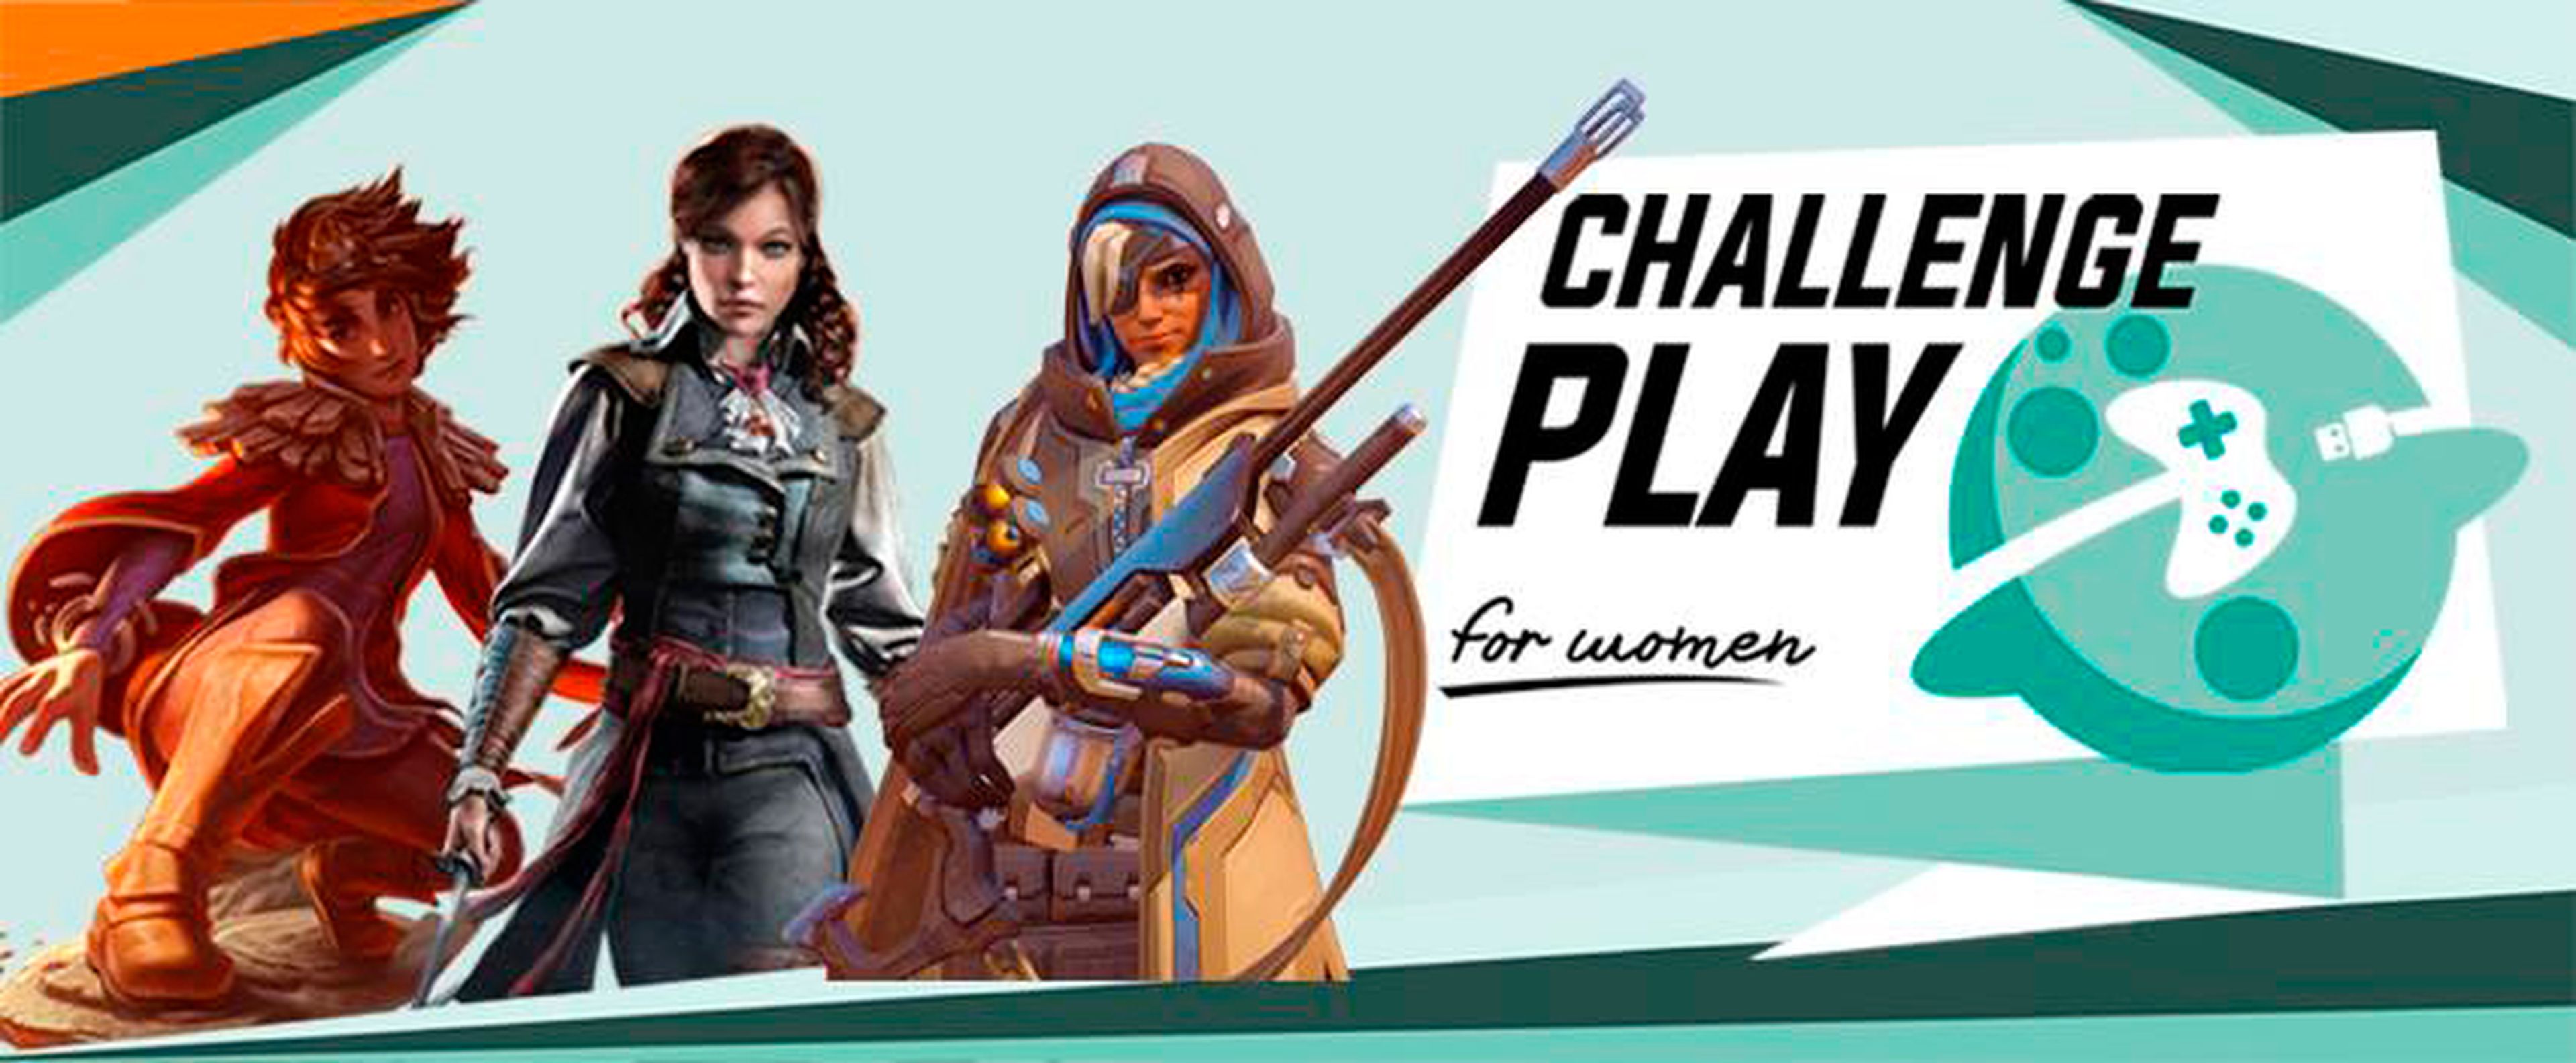 Challenge Play for Women